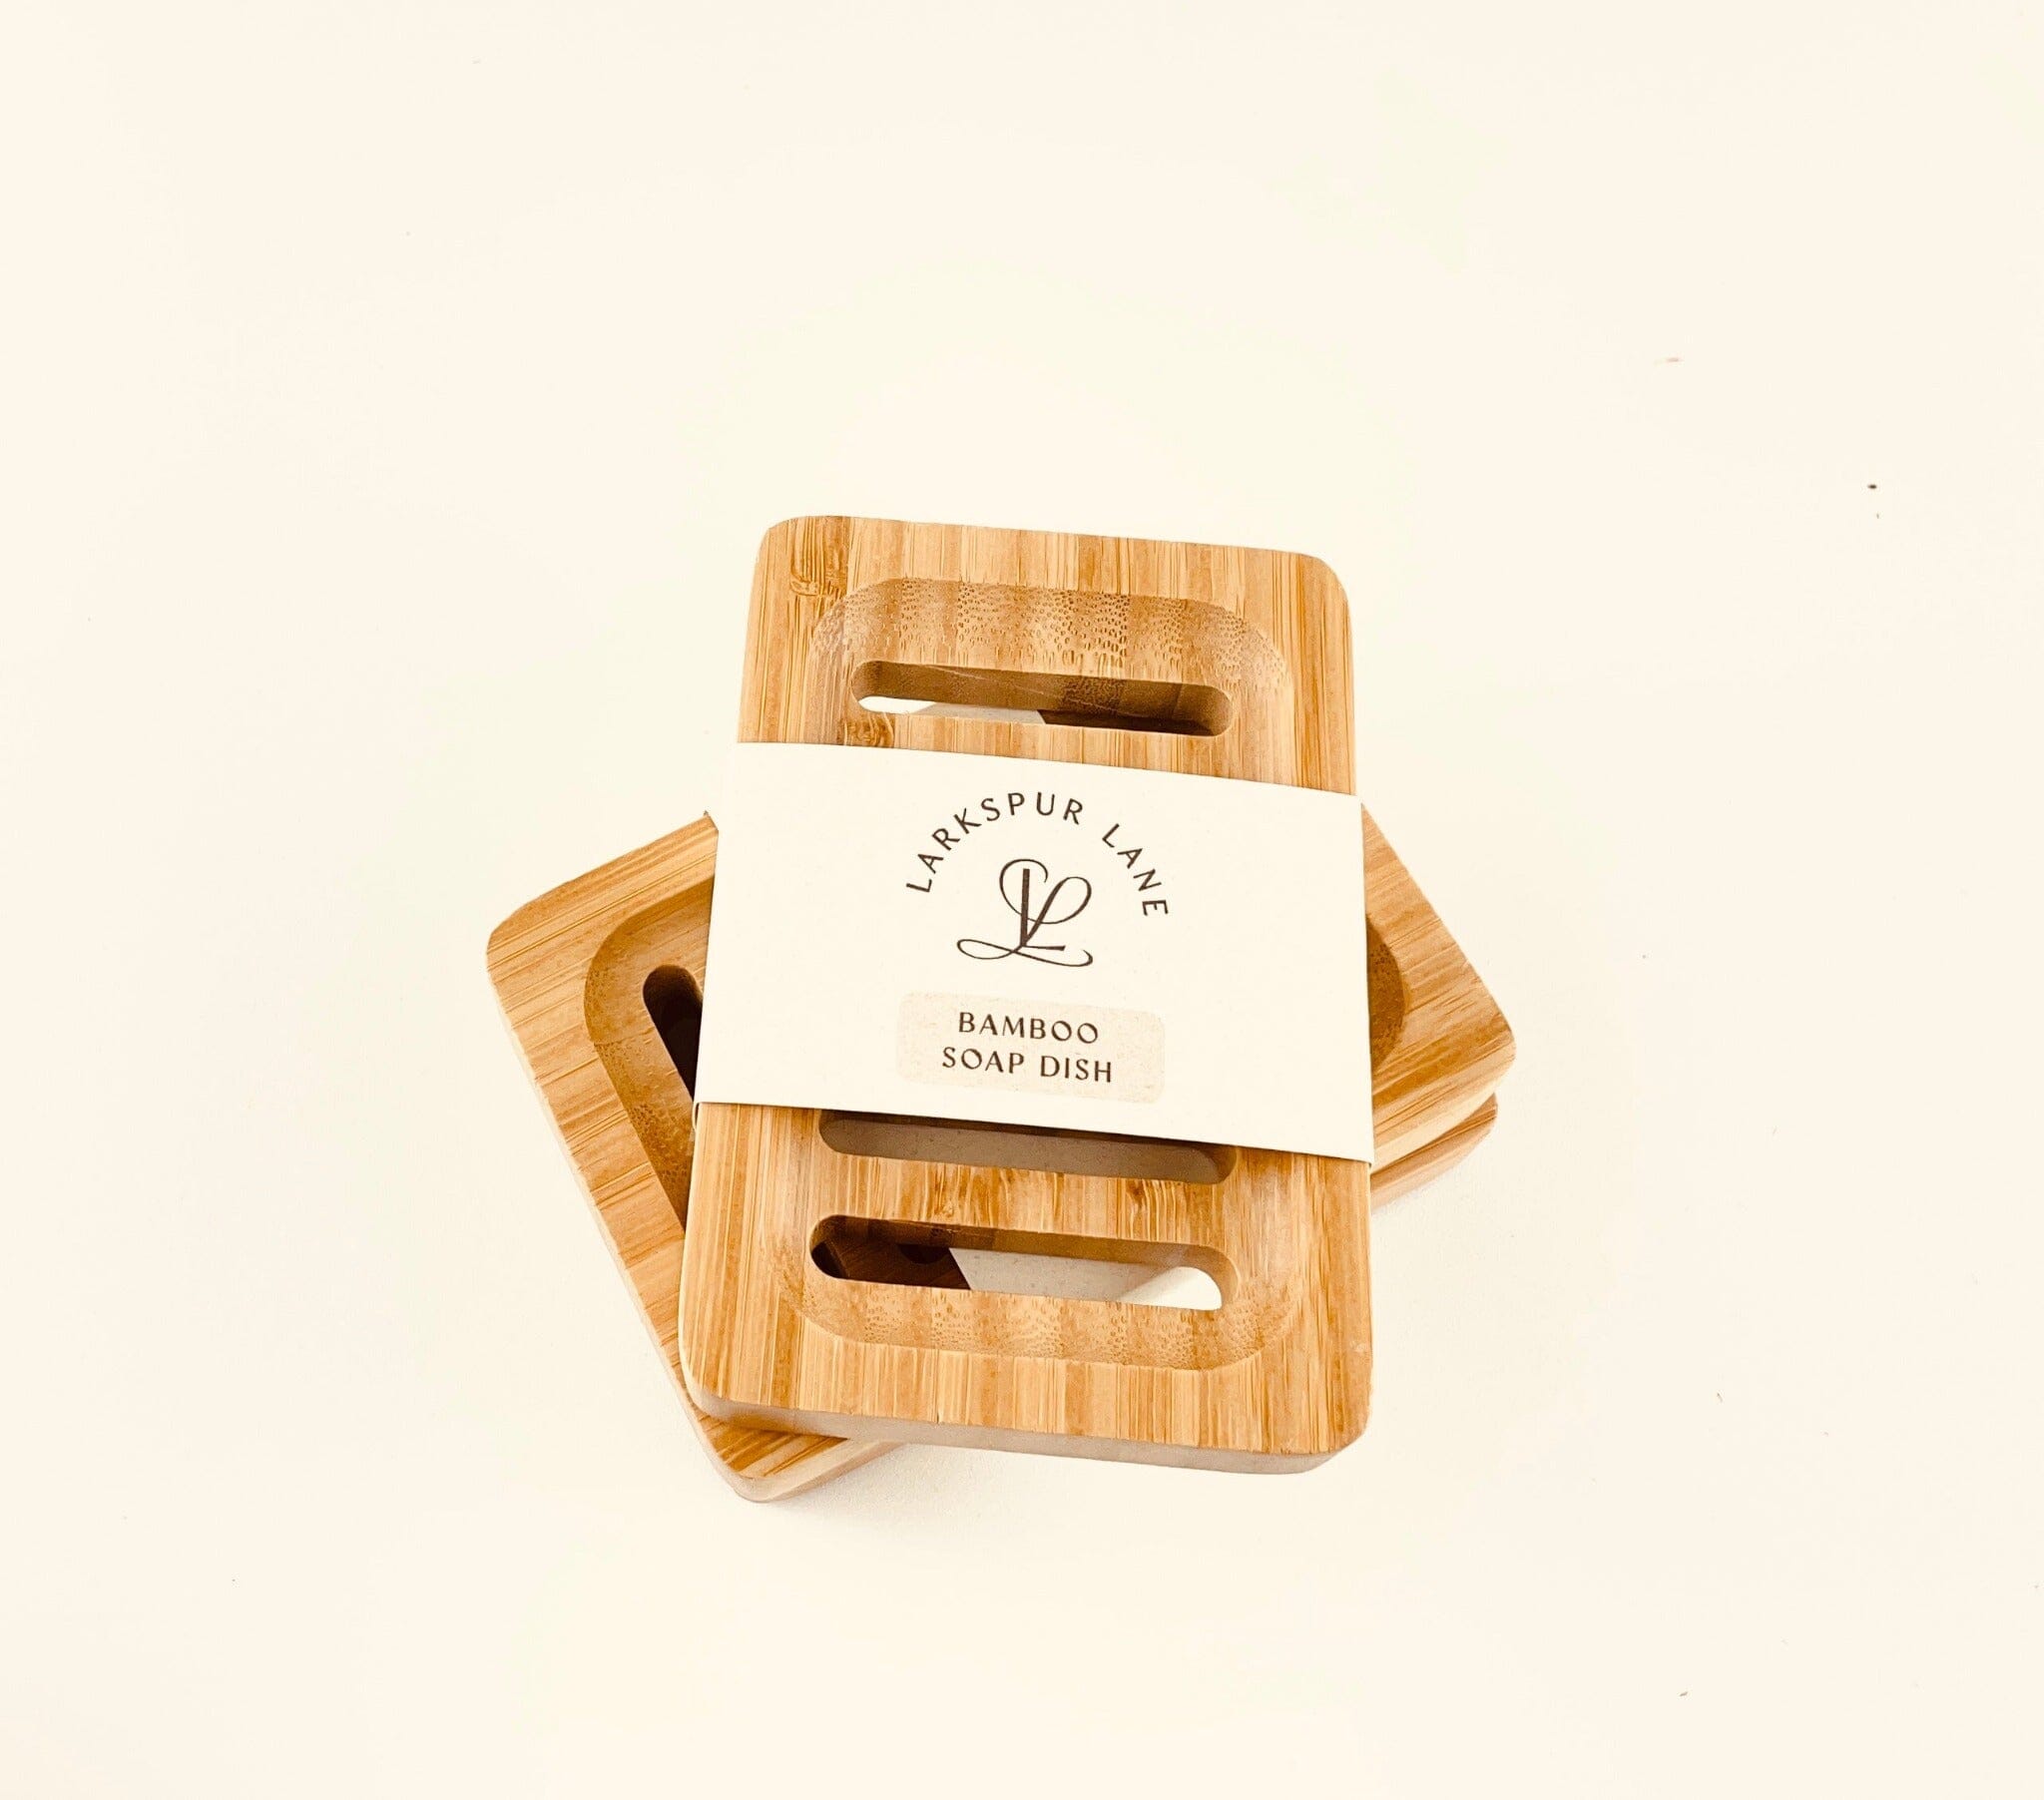 two bamboo soap dishes with recyclable paper labels stacked on each other